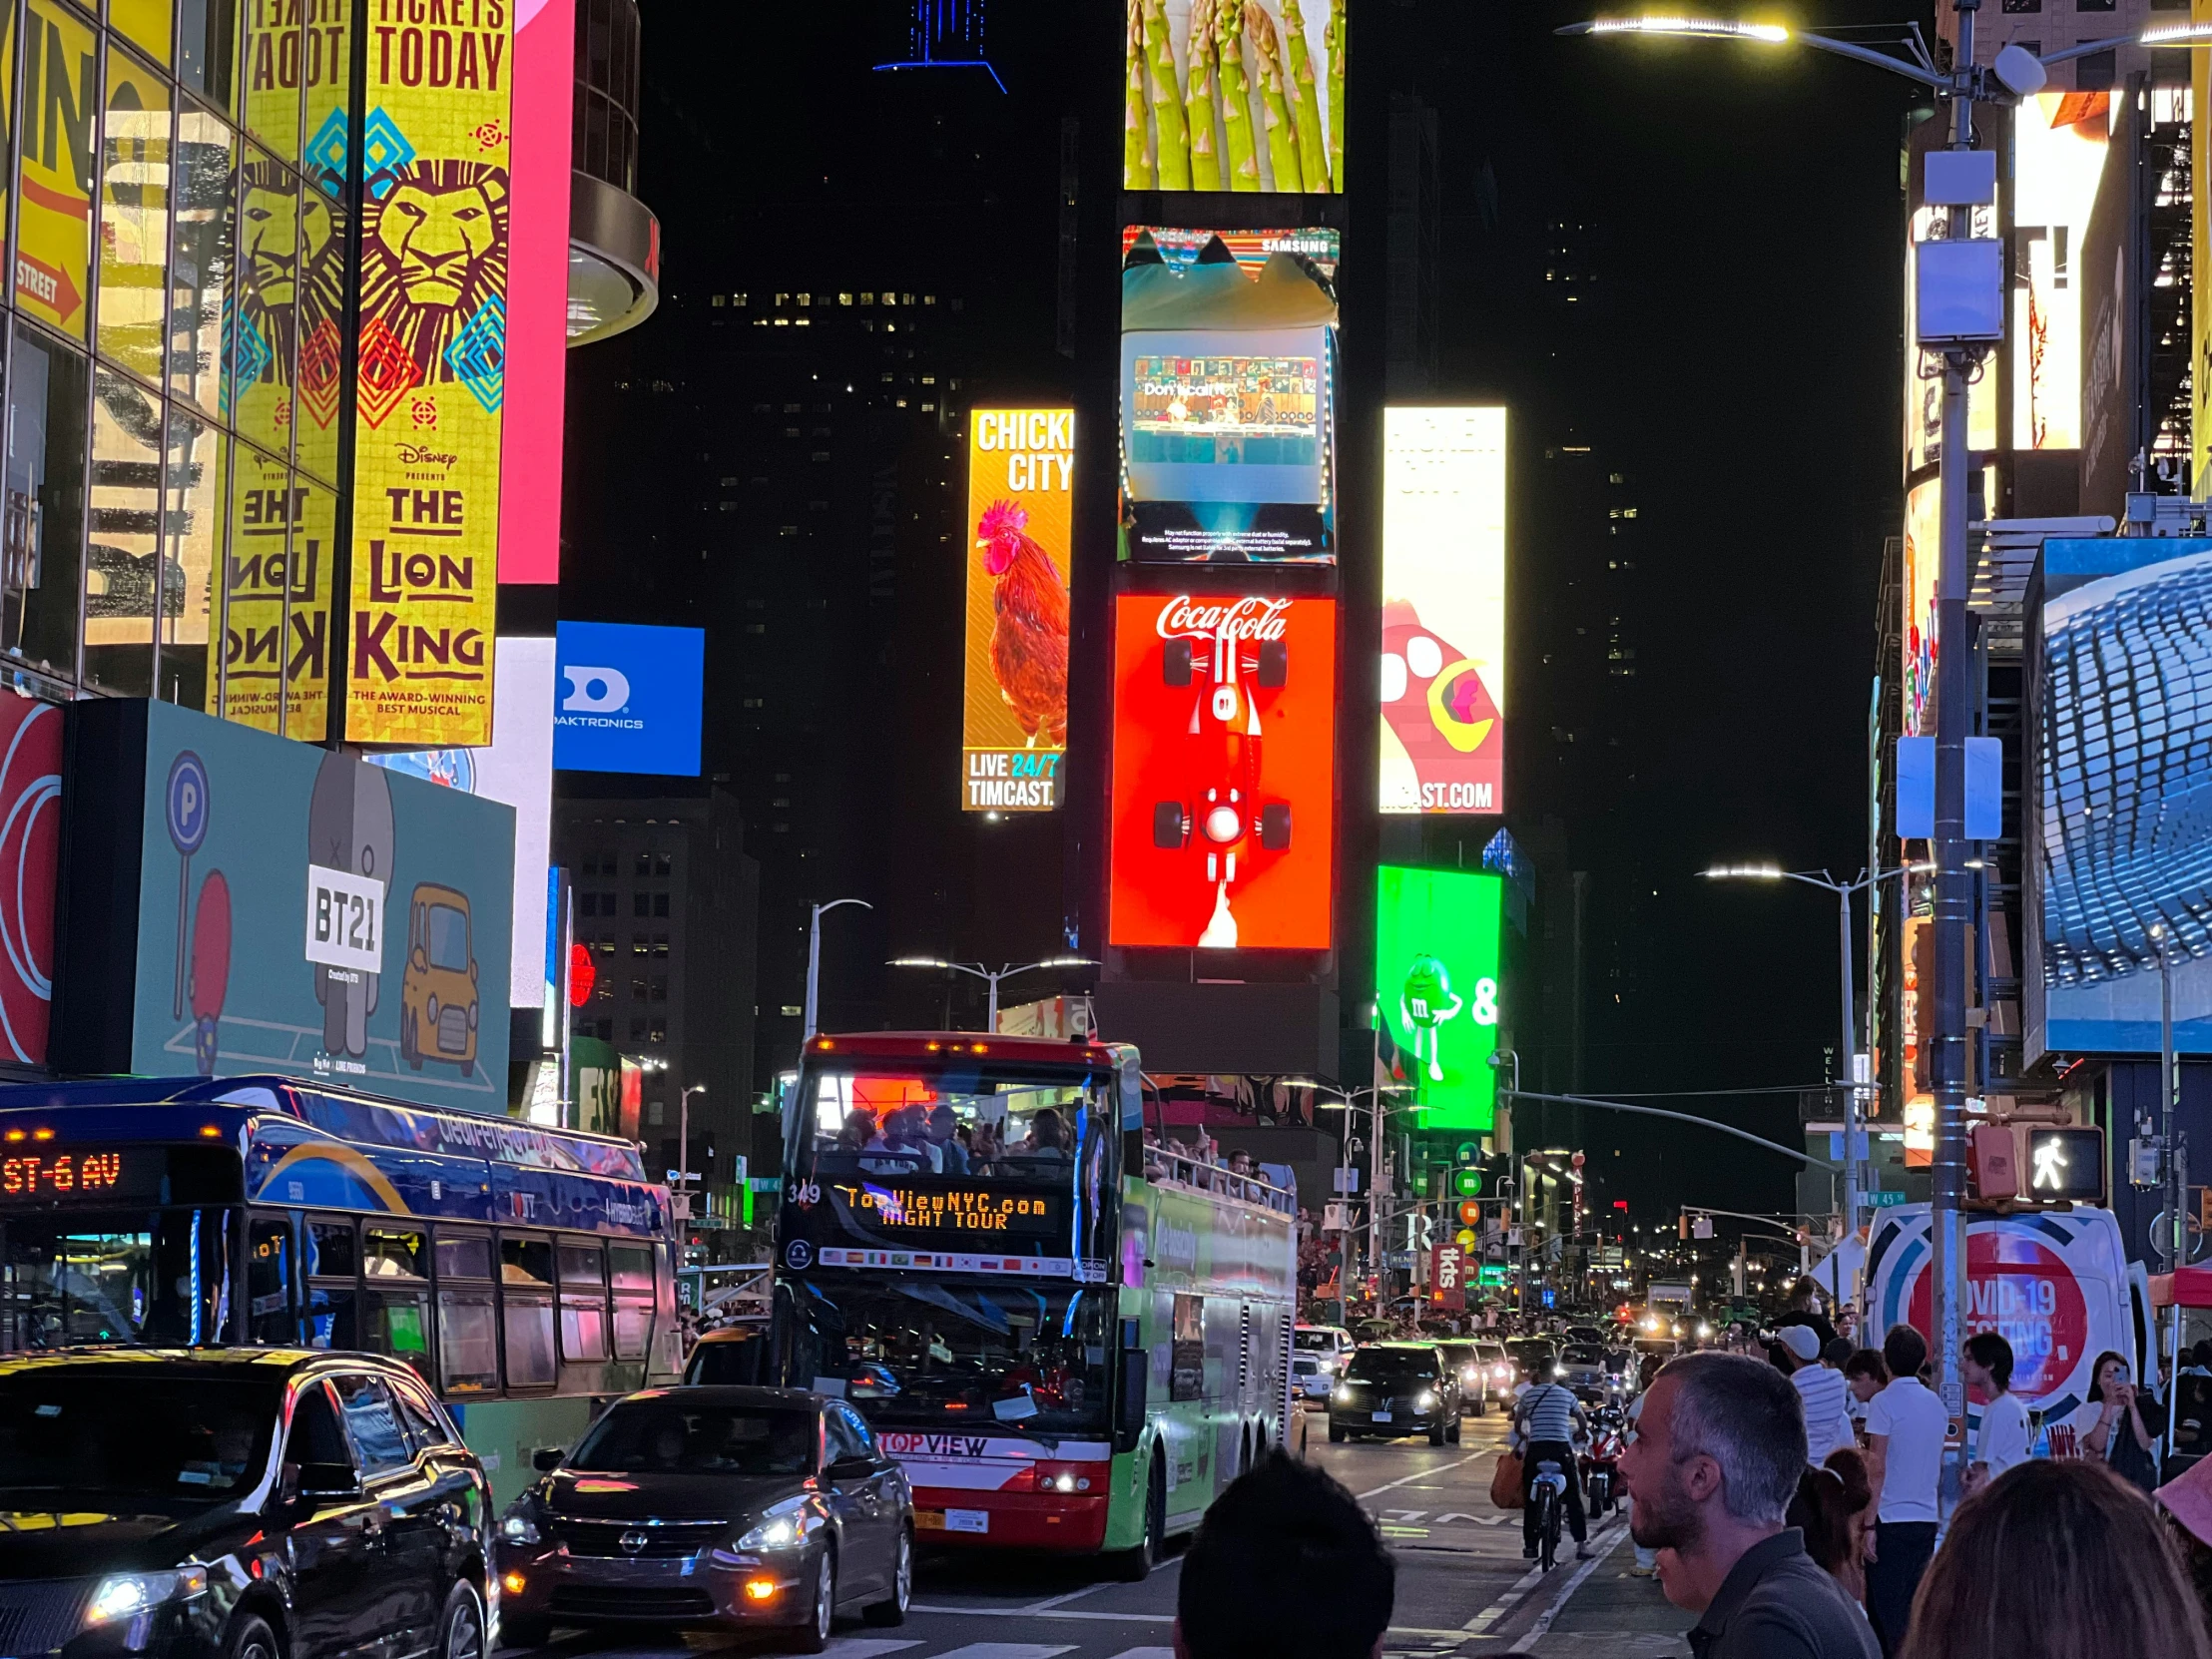 crowded city street at night with billboards lit up